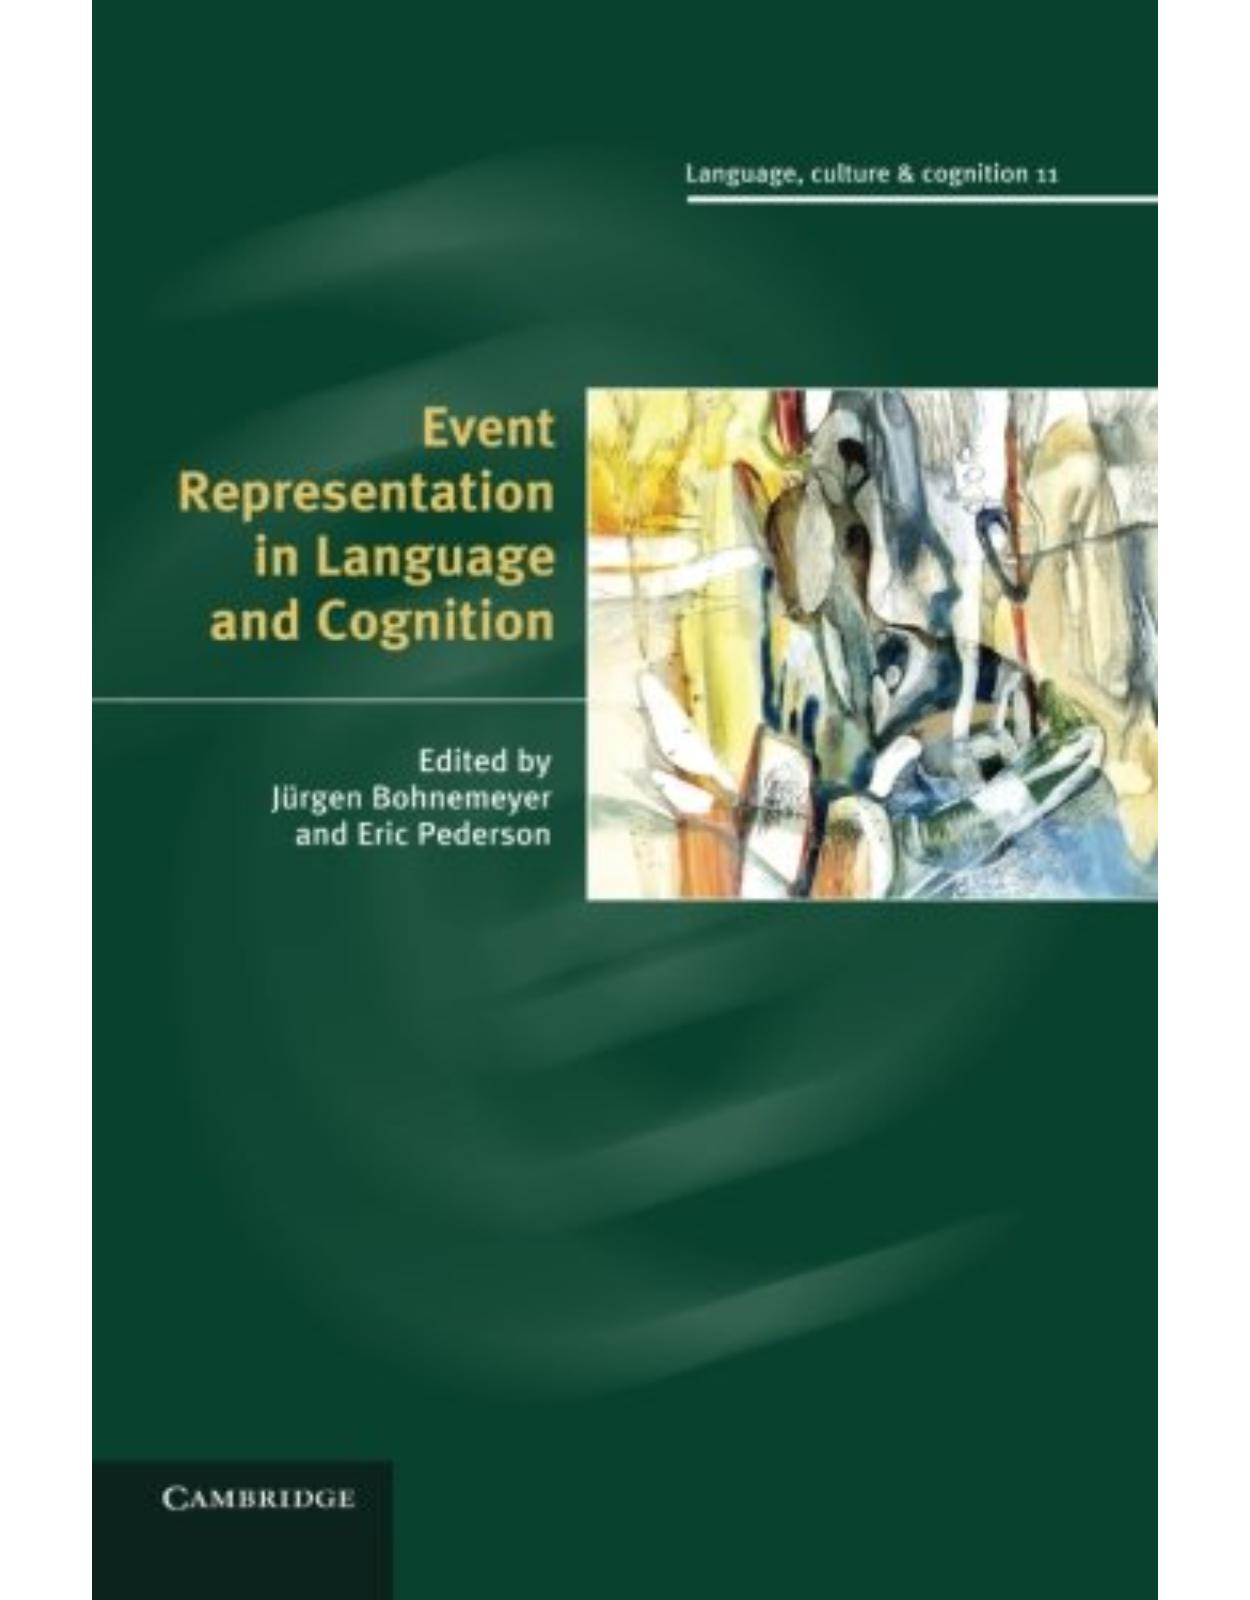 Event Representation in Language and Cognition (Language Culture and Cognition)